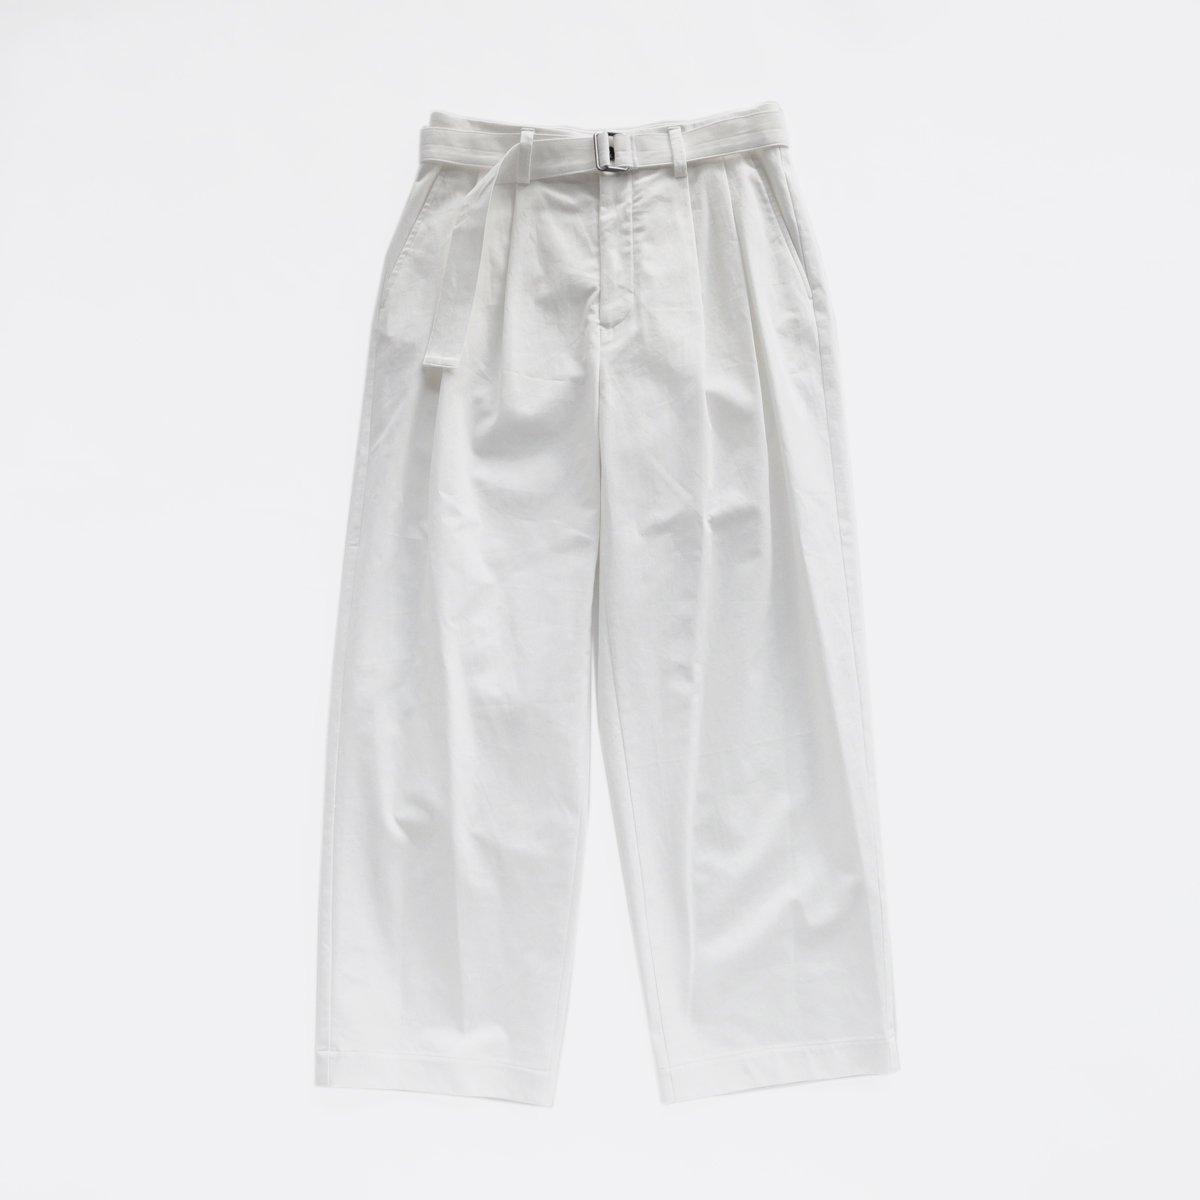 WIRROW cotton chino belted tuck pants - パンツ